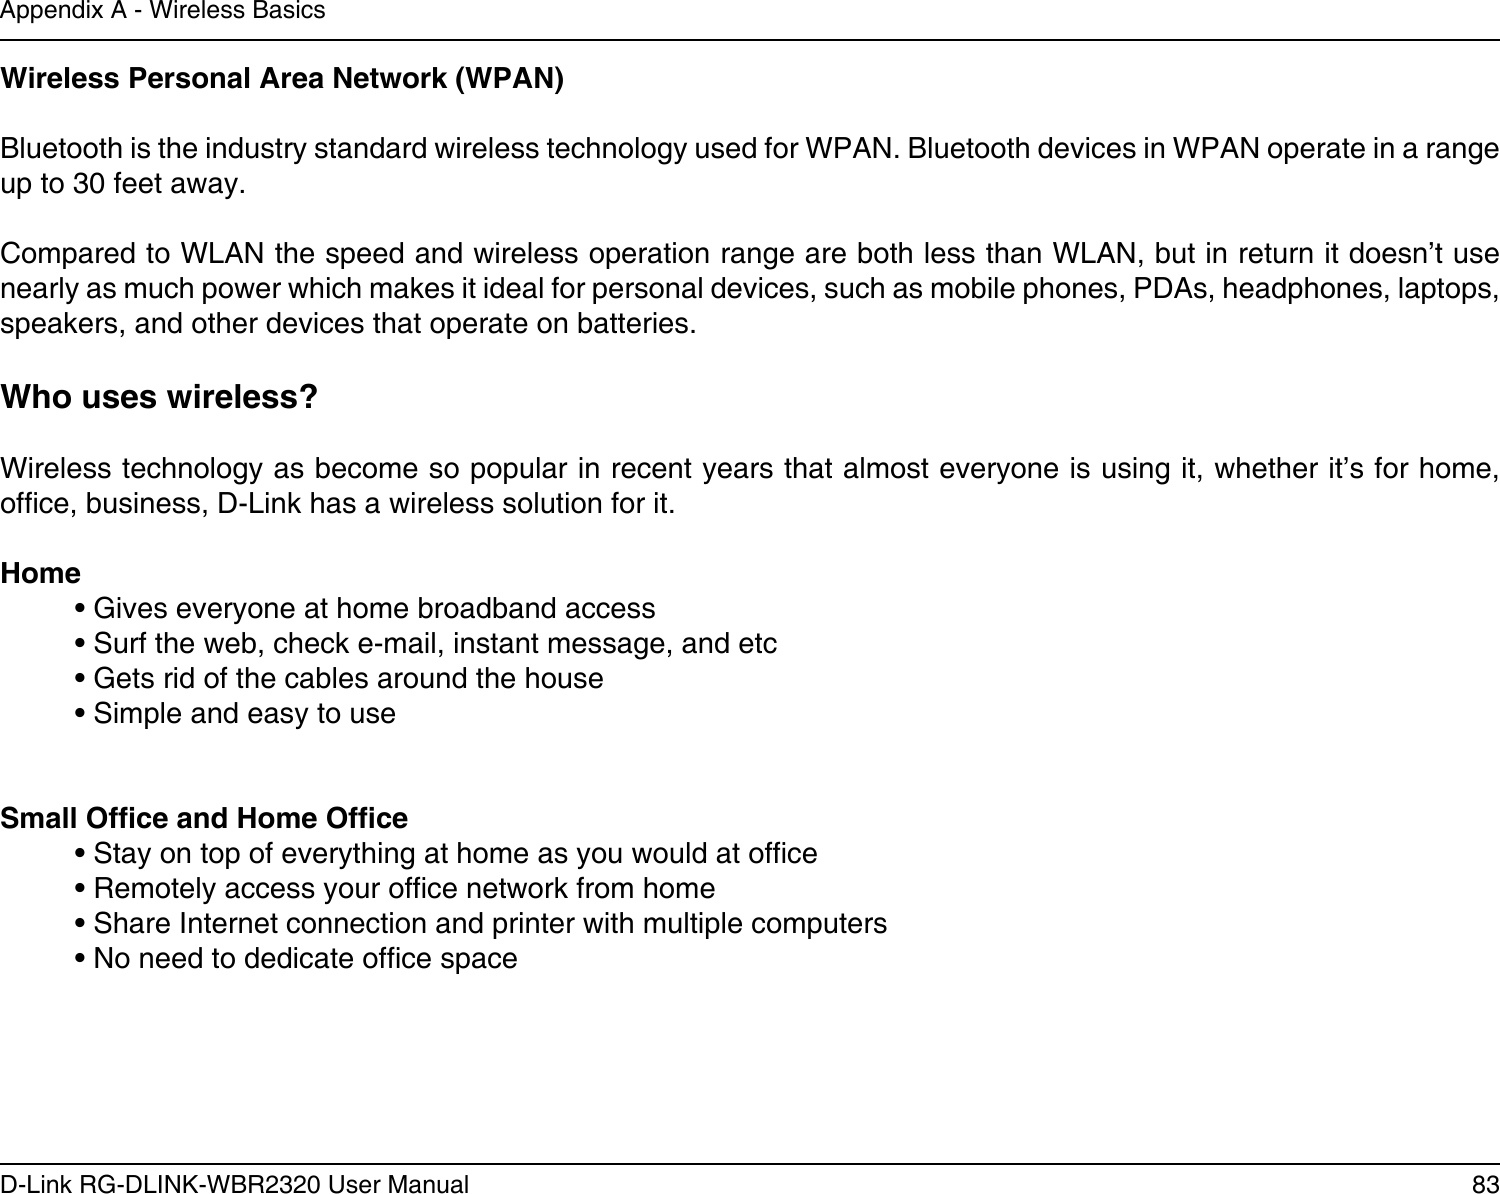 83D-Link RG-DLINK-WBR2320 User ManualAppendix A - Wireless BasicsWireless Personal Area Network (WPAN)Bluetooth is the industry standard wireless technology used for WPAN. Bluetooth devices in WPAN operate in a range up to 30 feet away.Compared to WLAN the speed and wireless operation range are both less than WLAN, but in return it doesn’t use nearly as much power which makes it ideal for personal devices, such as mobile phones, PDAs, headphones, laptops, speakers, and other devices that operate on batteries.Who uses wireless?   Wireless technology as become so popular in recent years that almost everyone is using it, whether it’s for home, ofce, business, D-Link has a wireless solution for it.Home  • Gives everyone at home broadband access  • Surf the web, check e-mail, instant message, and etc  • Gets rid of the cables around the house  • Simple and easy to use Small Ofce and Home Ofce  • Stay on top of everything at home as you would at ofce  • Remotely access your ofce network from home  • Share Internet connection and printer with multiple computers  • No need to dedicate ofce space   